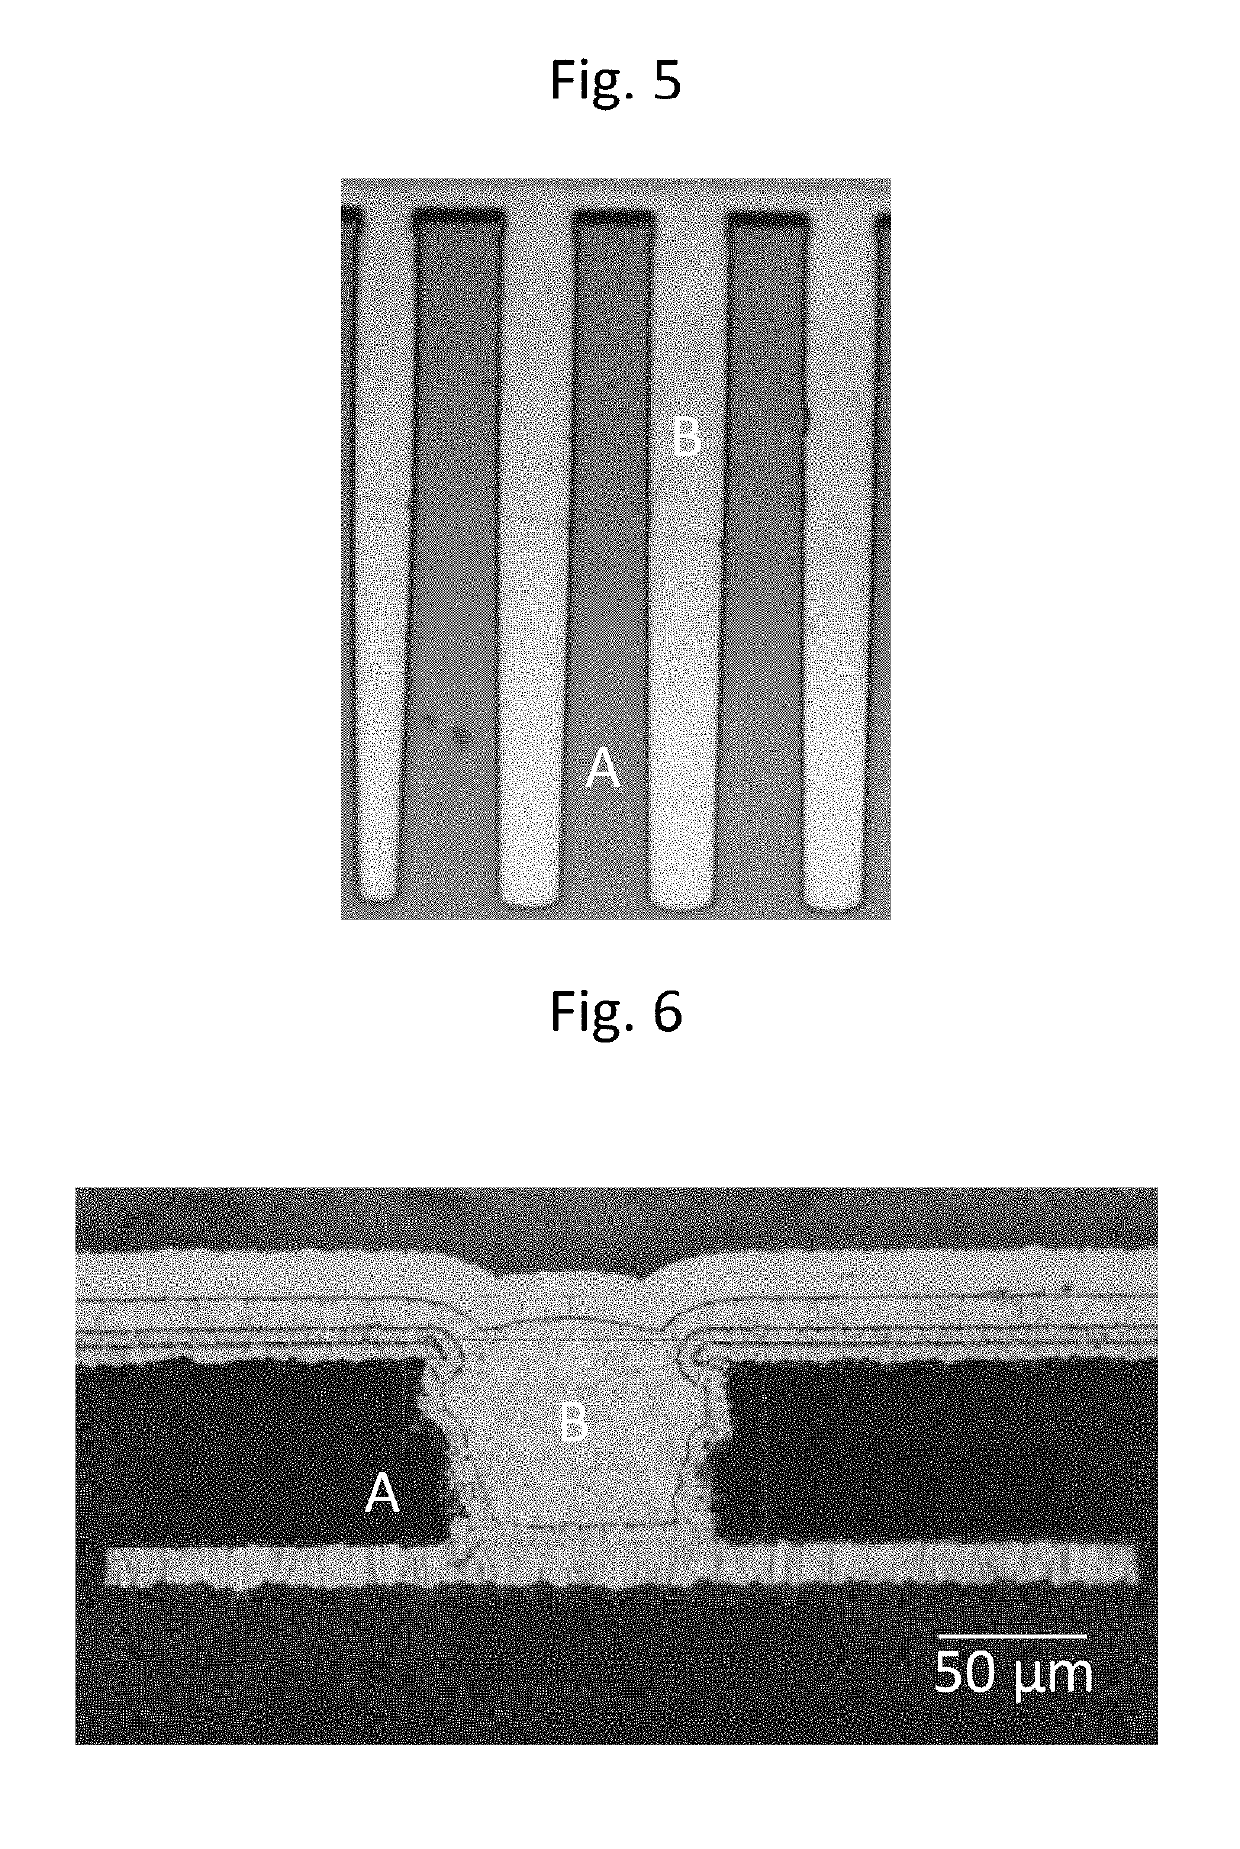 Acidic aqueous composition for electrolytic copper plating